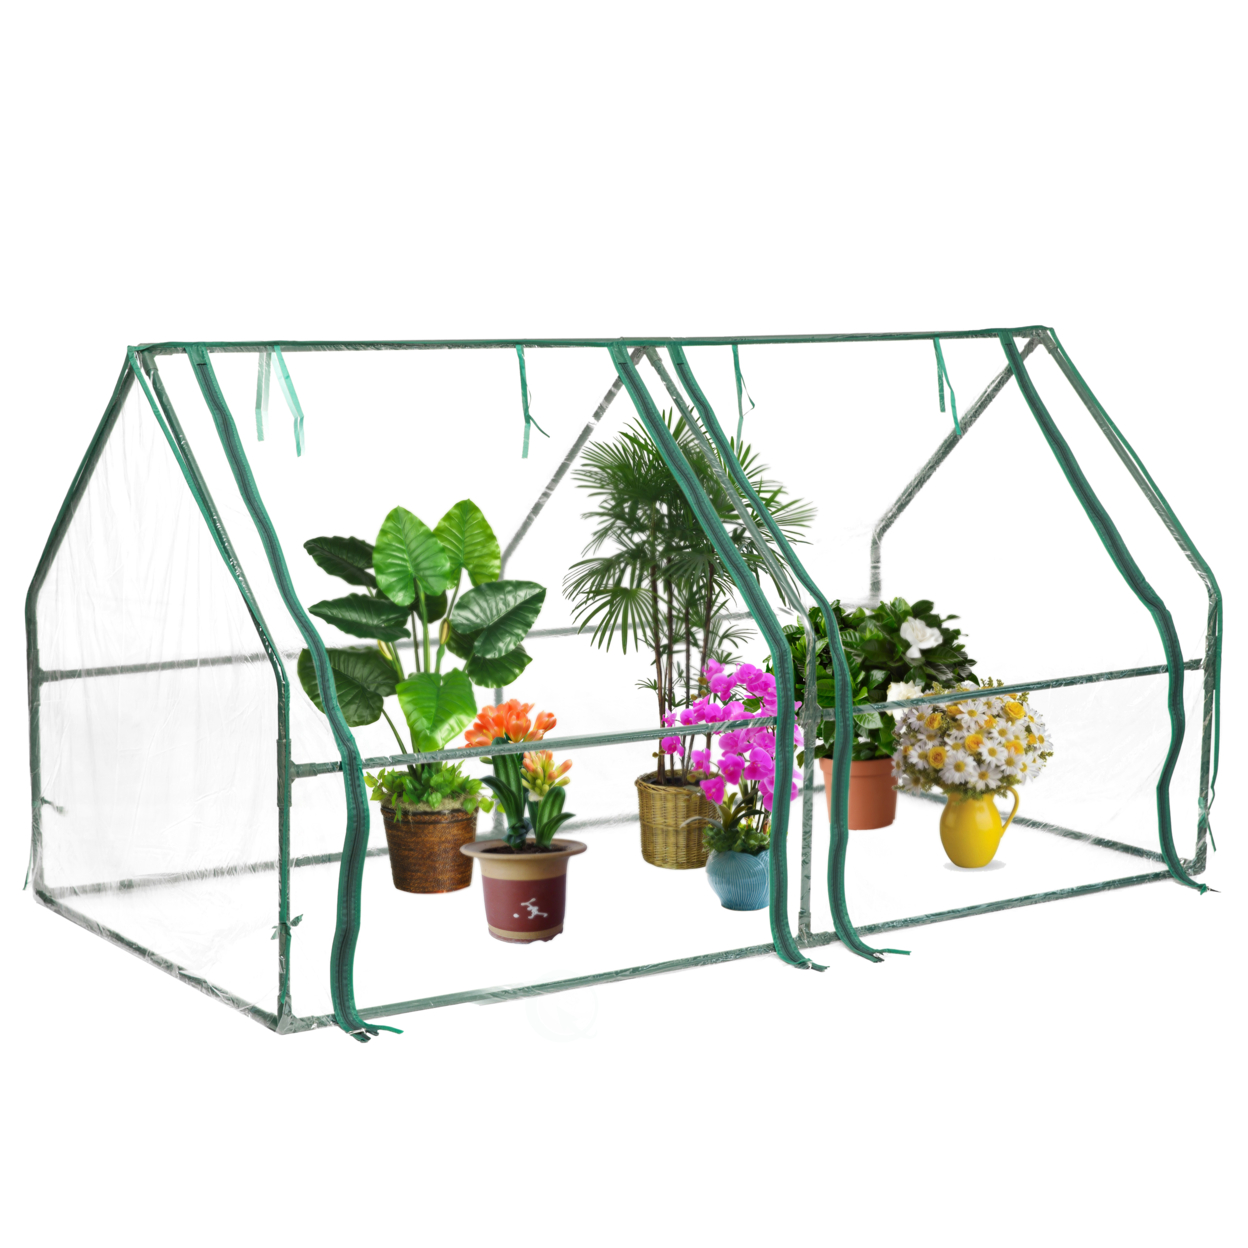 Green Outdoor Waterproof Portable Plant Greenhouse With 2 Clear Zippered Windows - Large